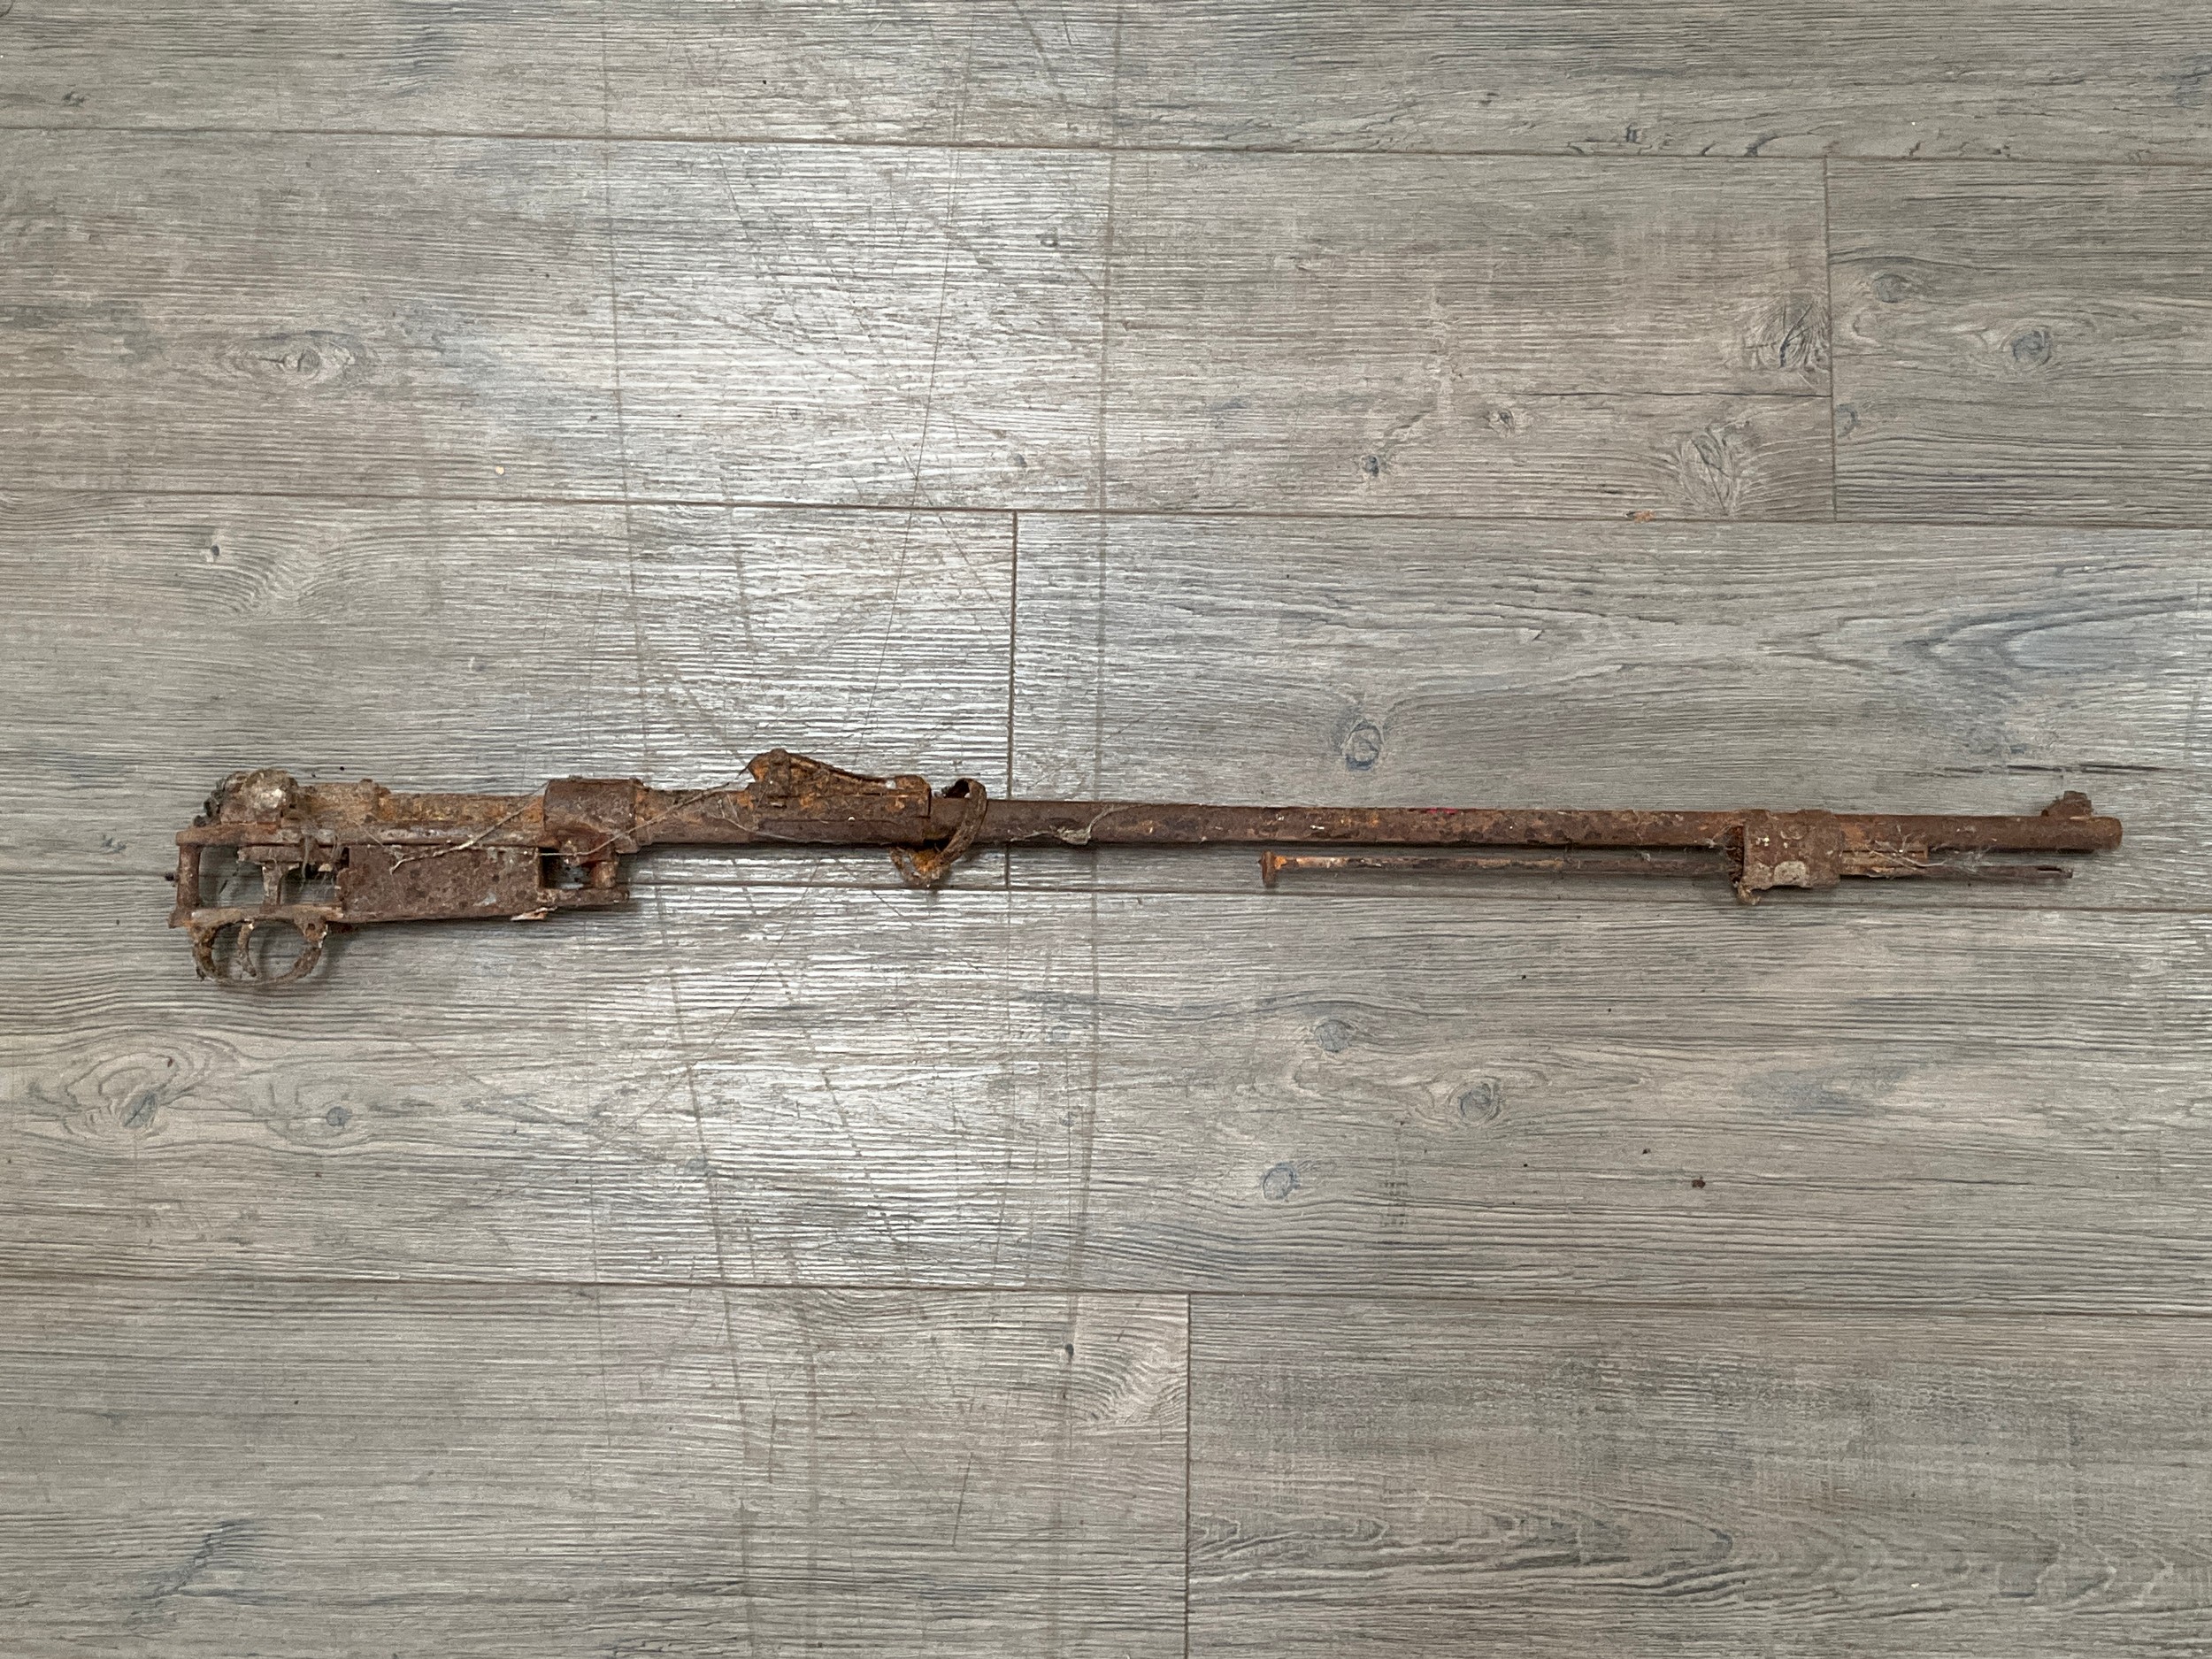 A German K98 relic trench find, inert